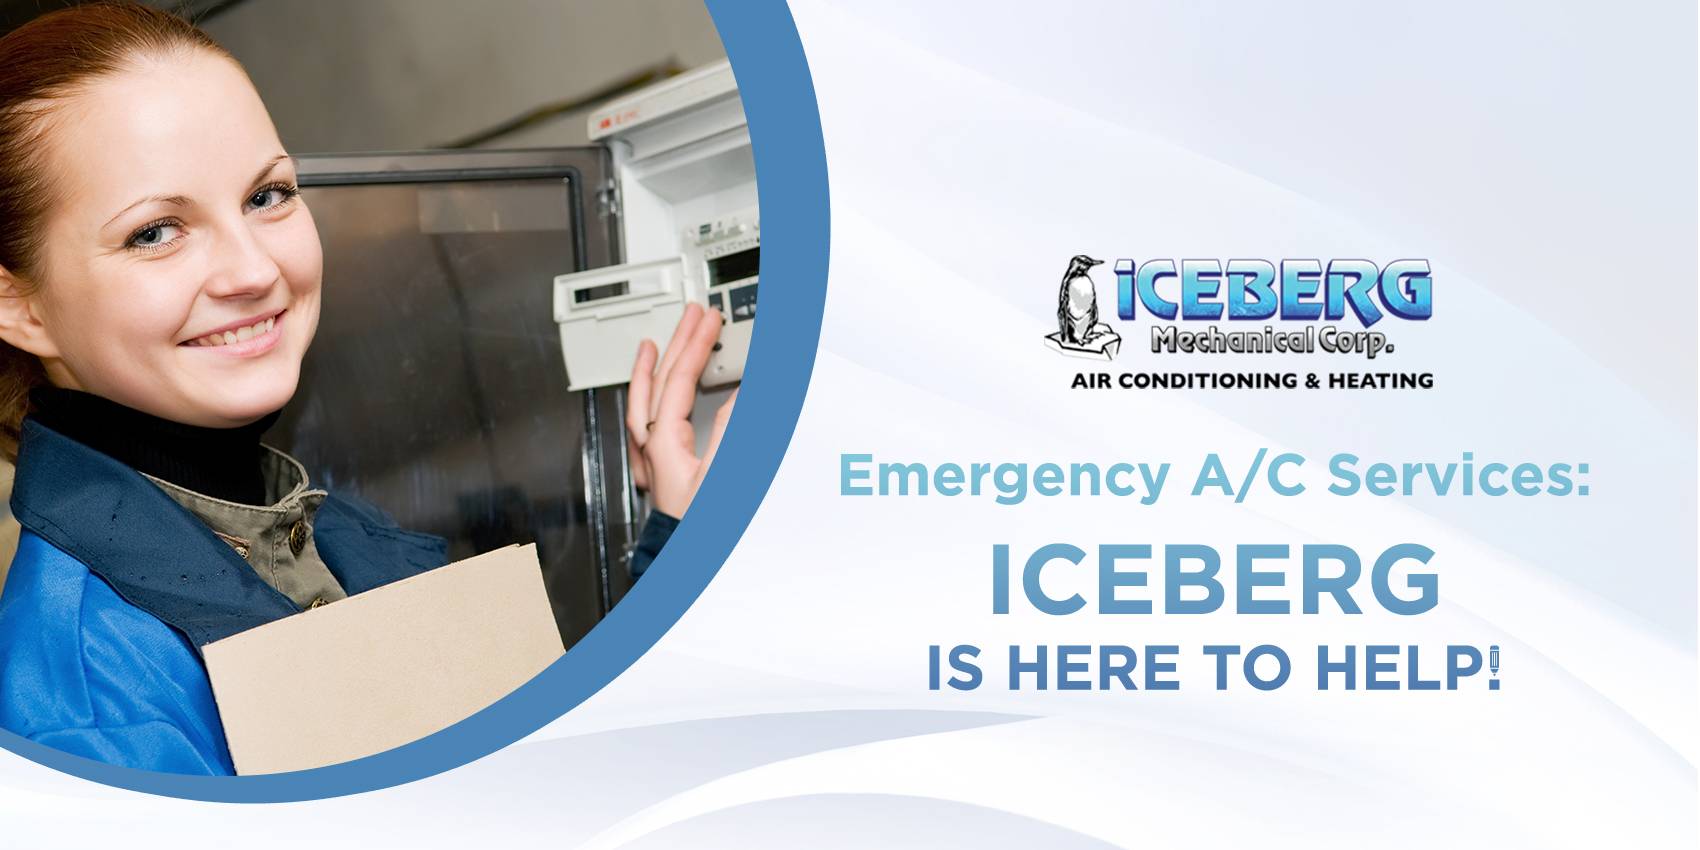 Emergency A/C Services: Iceberg Is Here To Help!